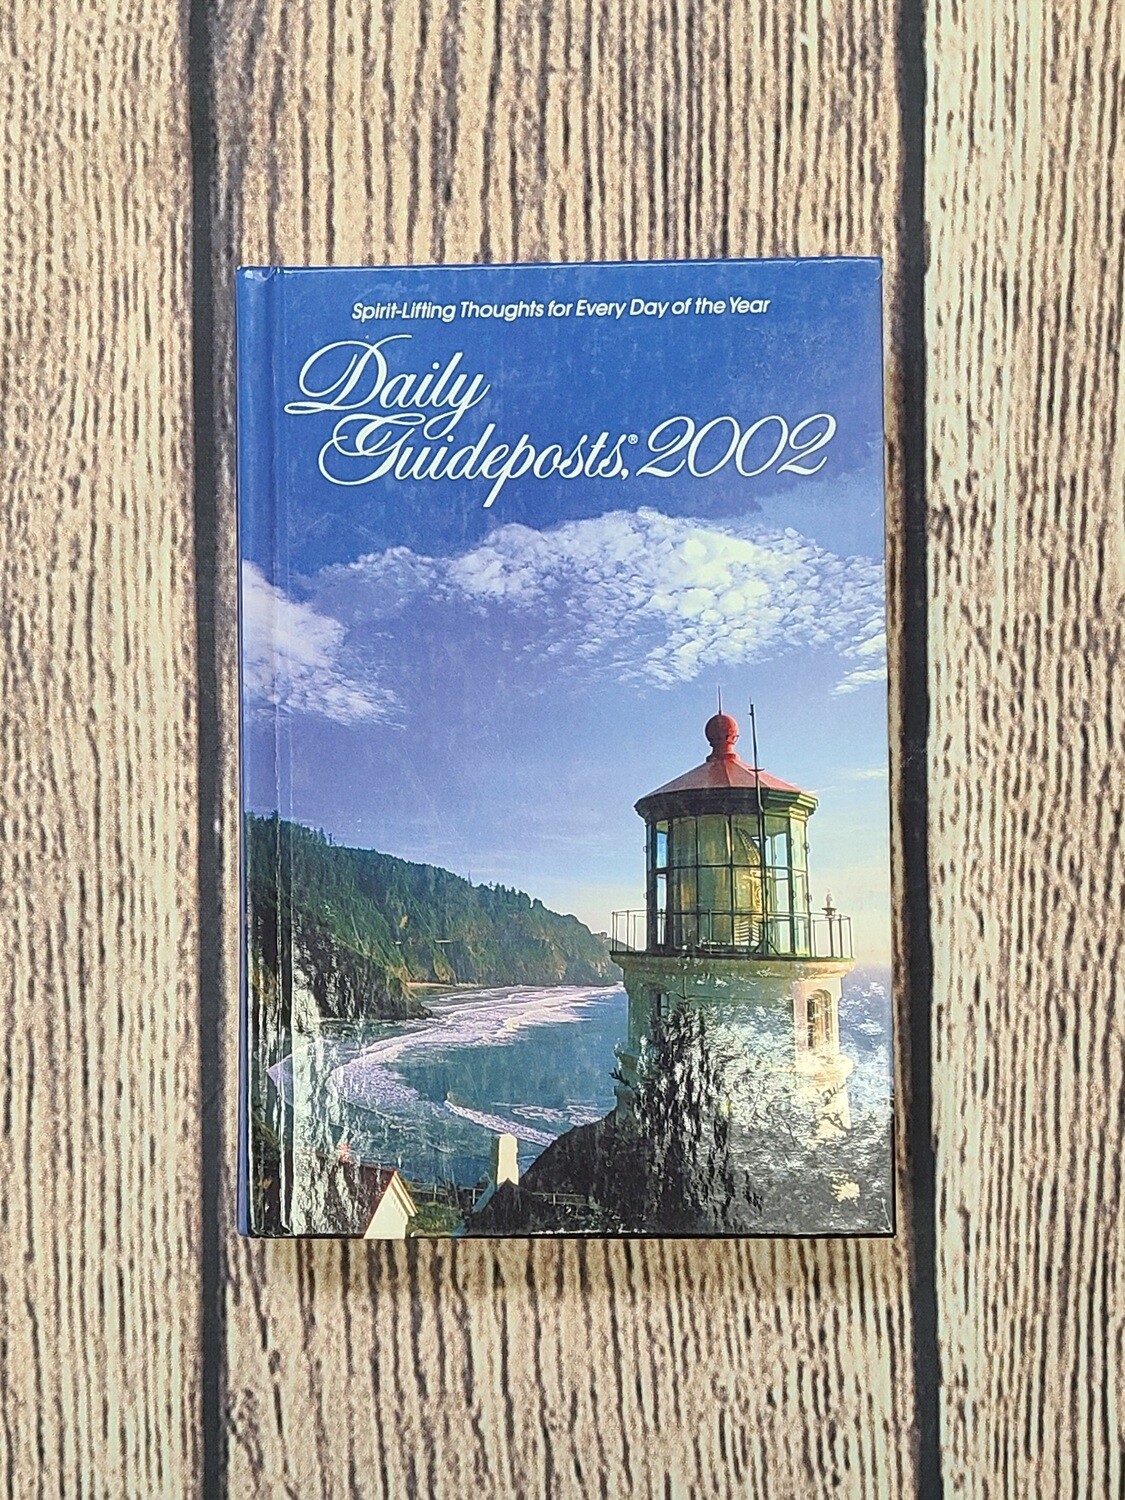 Daily Guideposts, 2002 by Various Authors